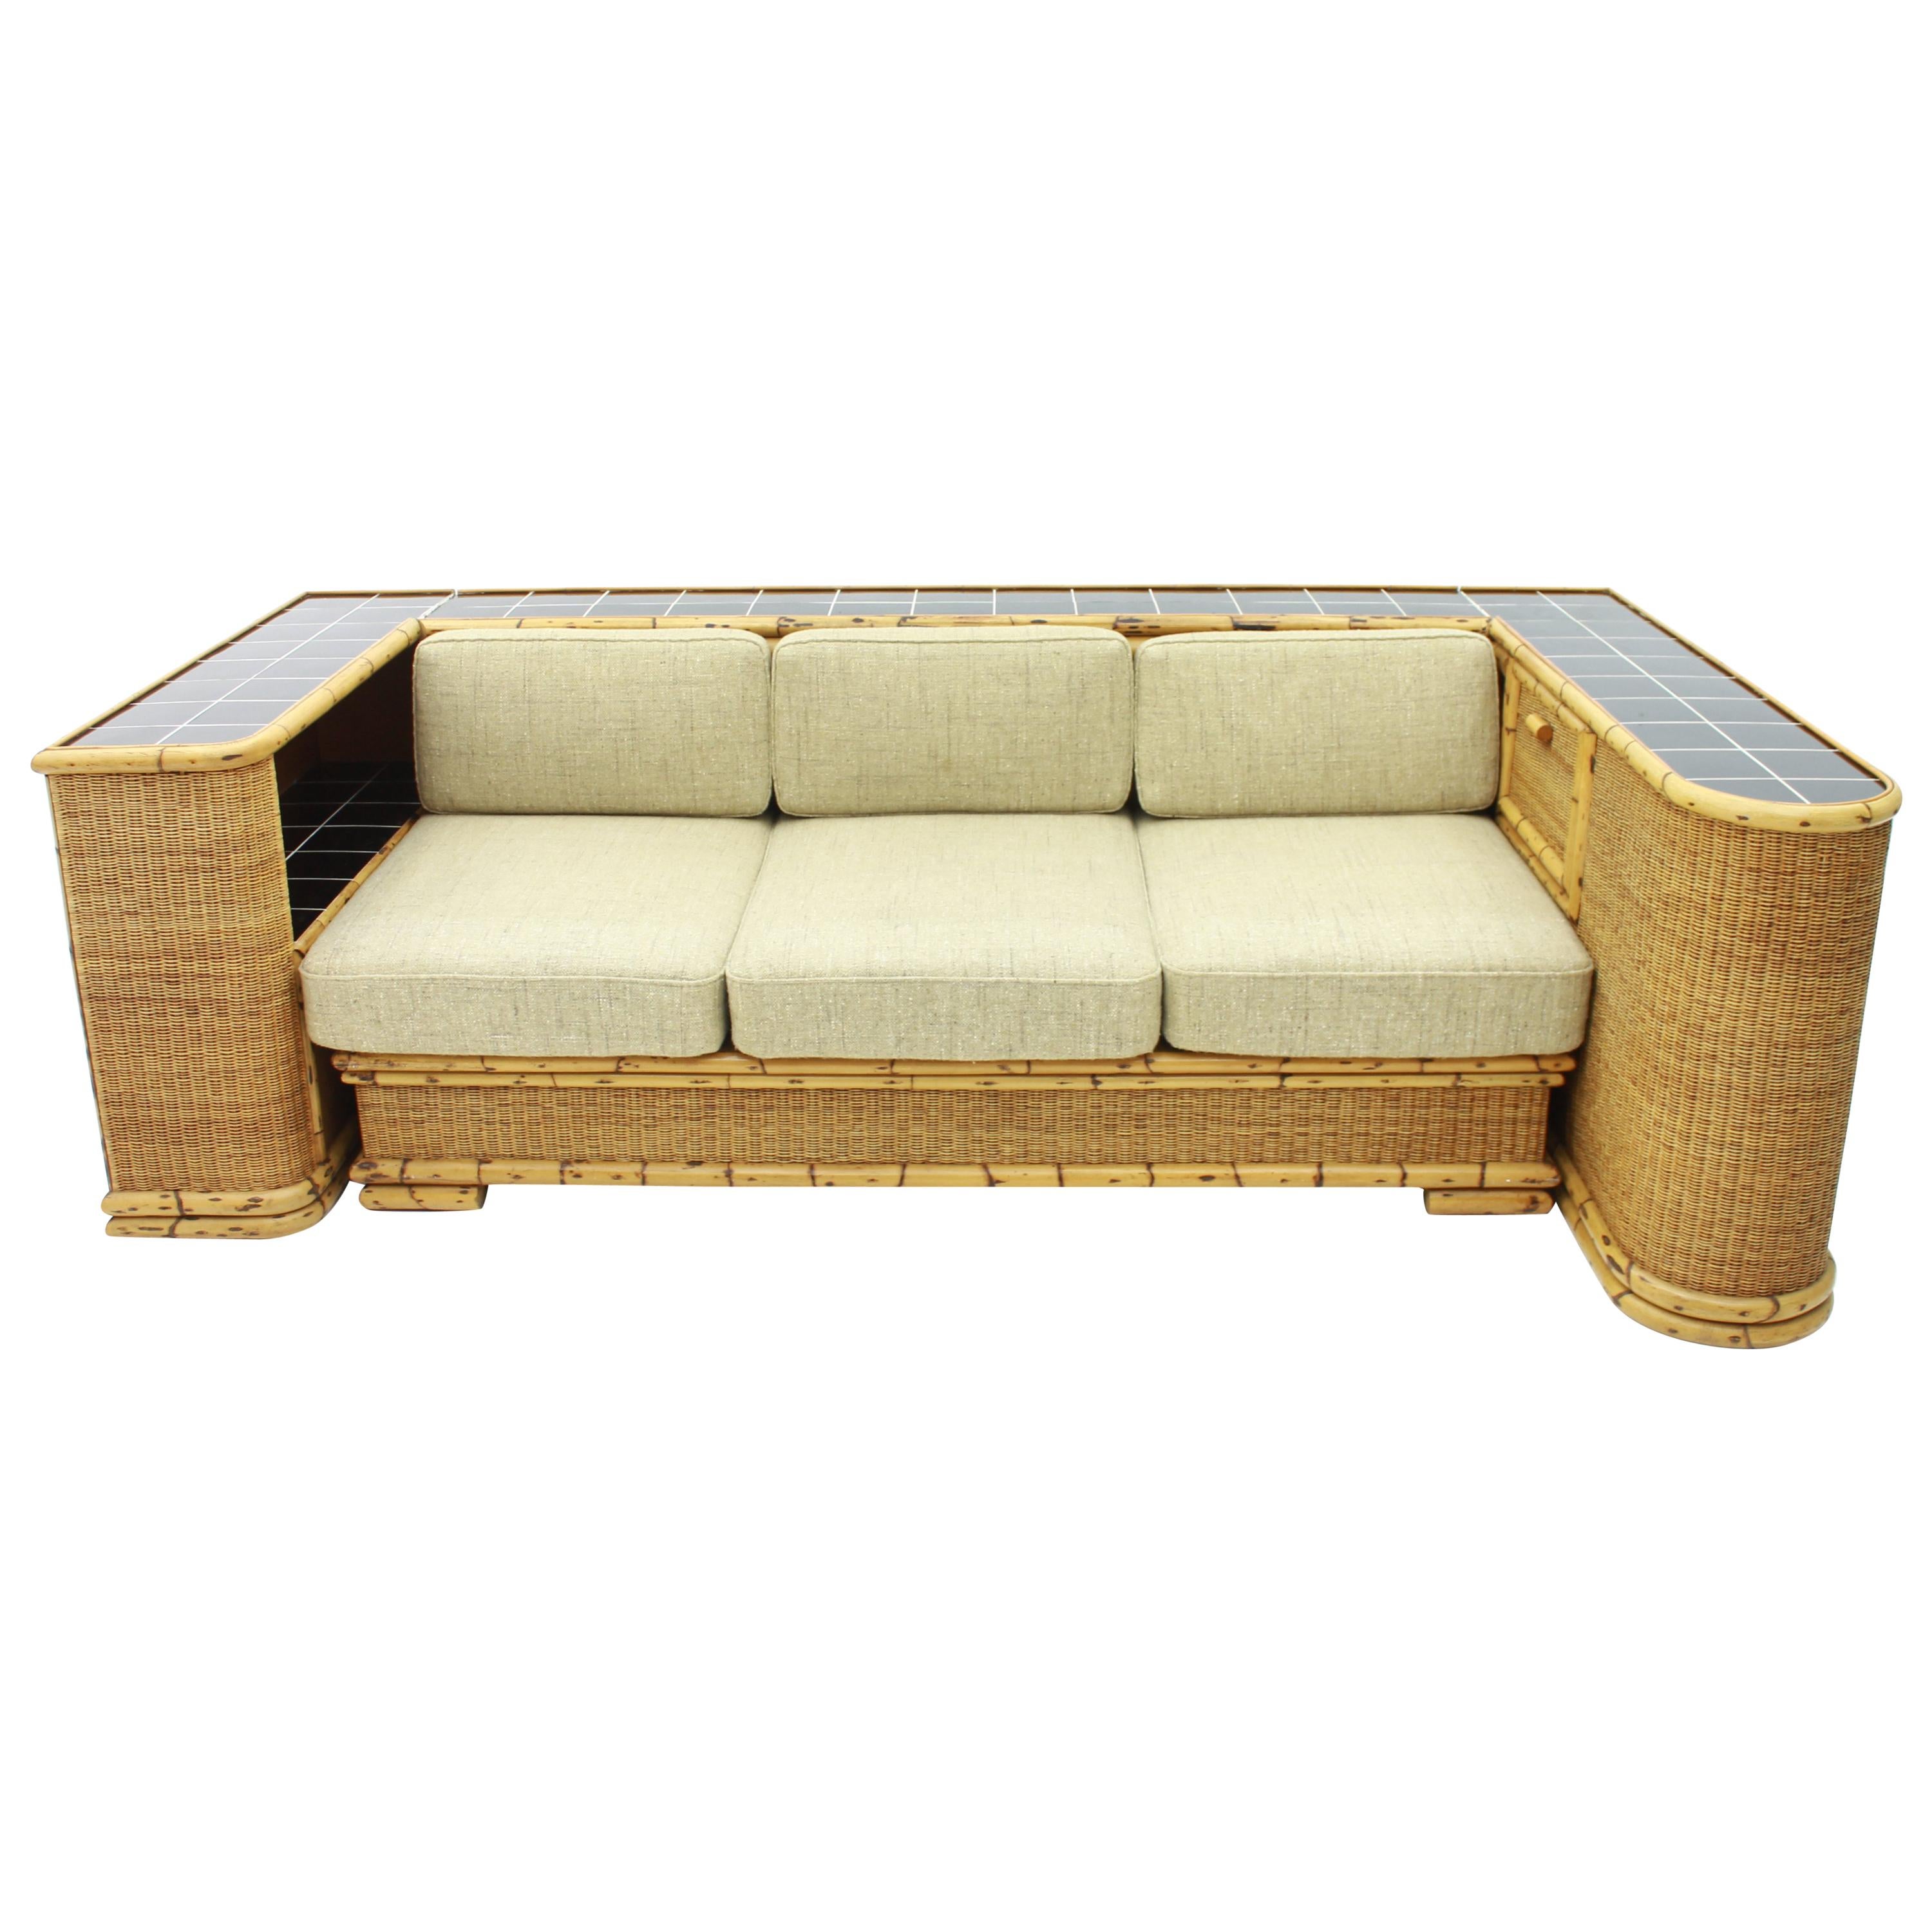 Rare Art Deco Bamboo & Rattan Daybed Sofa Room Divider by Arco Germany 1940s